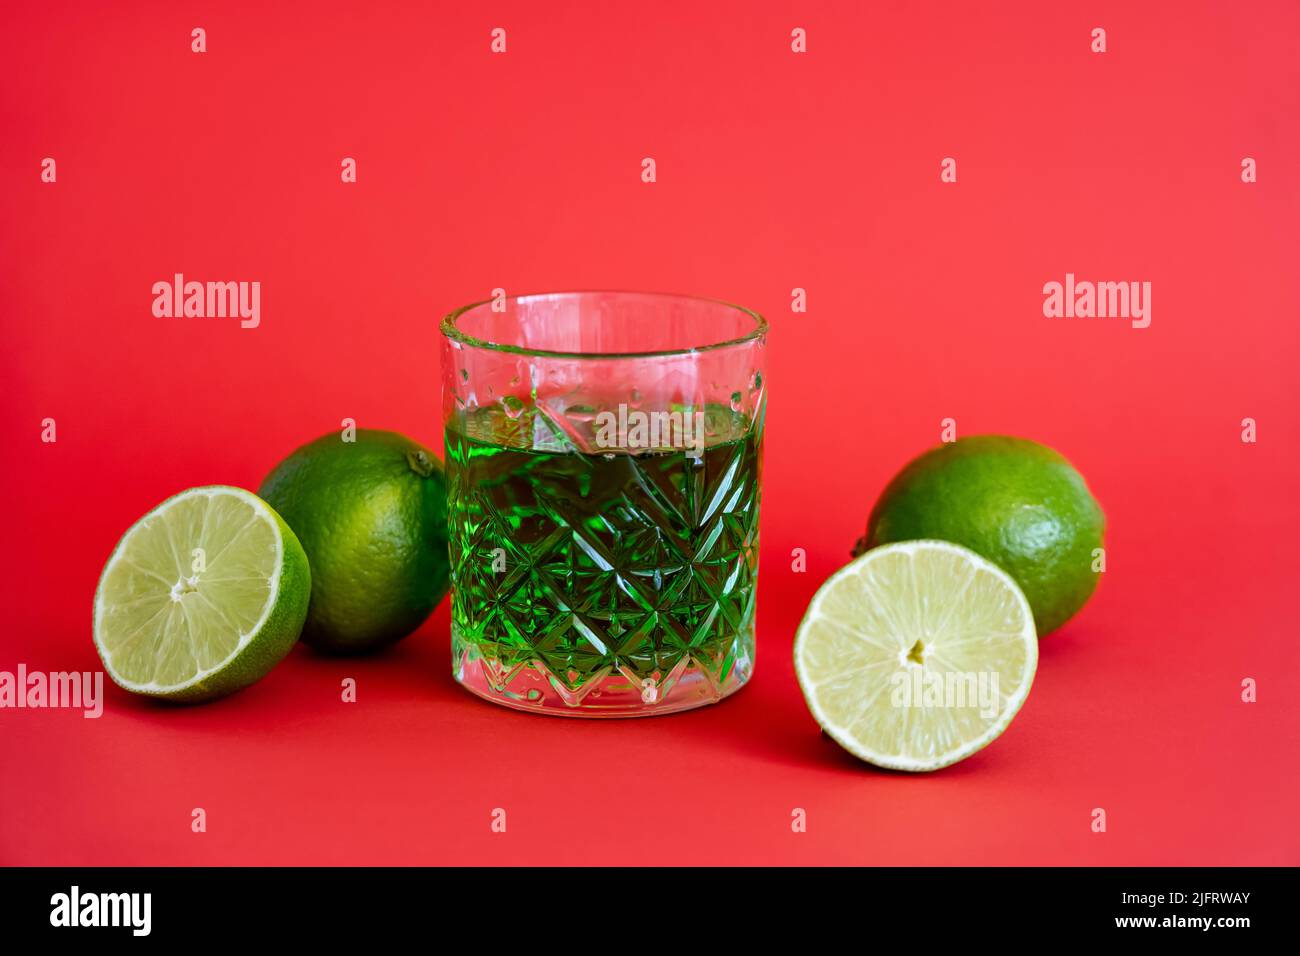 green alcohol drink in faceted glass near sour limes on red Stock Photo